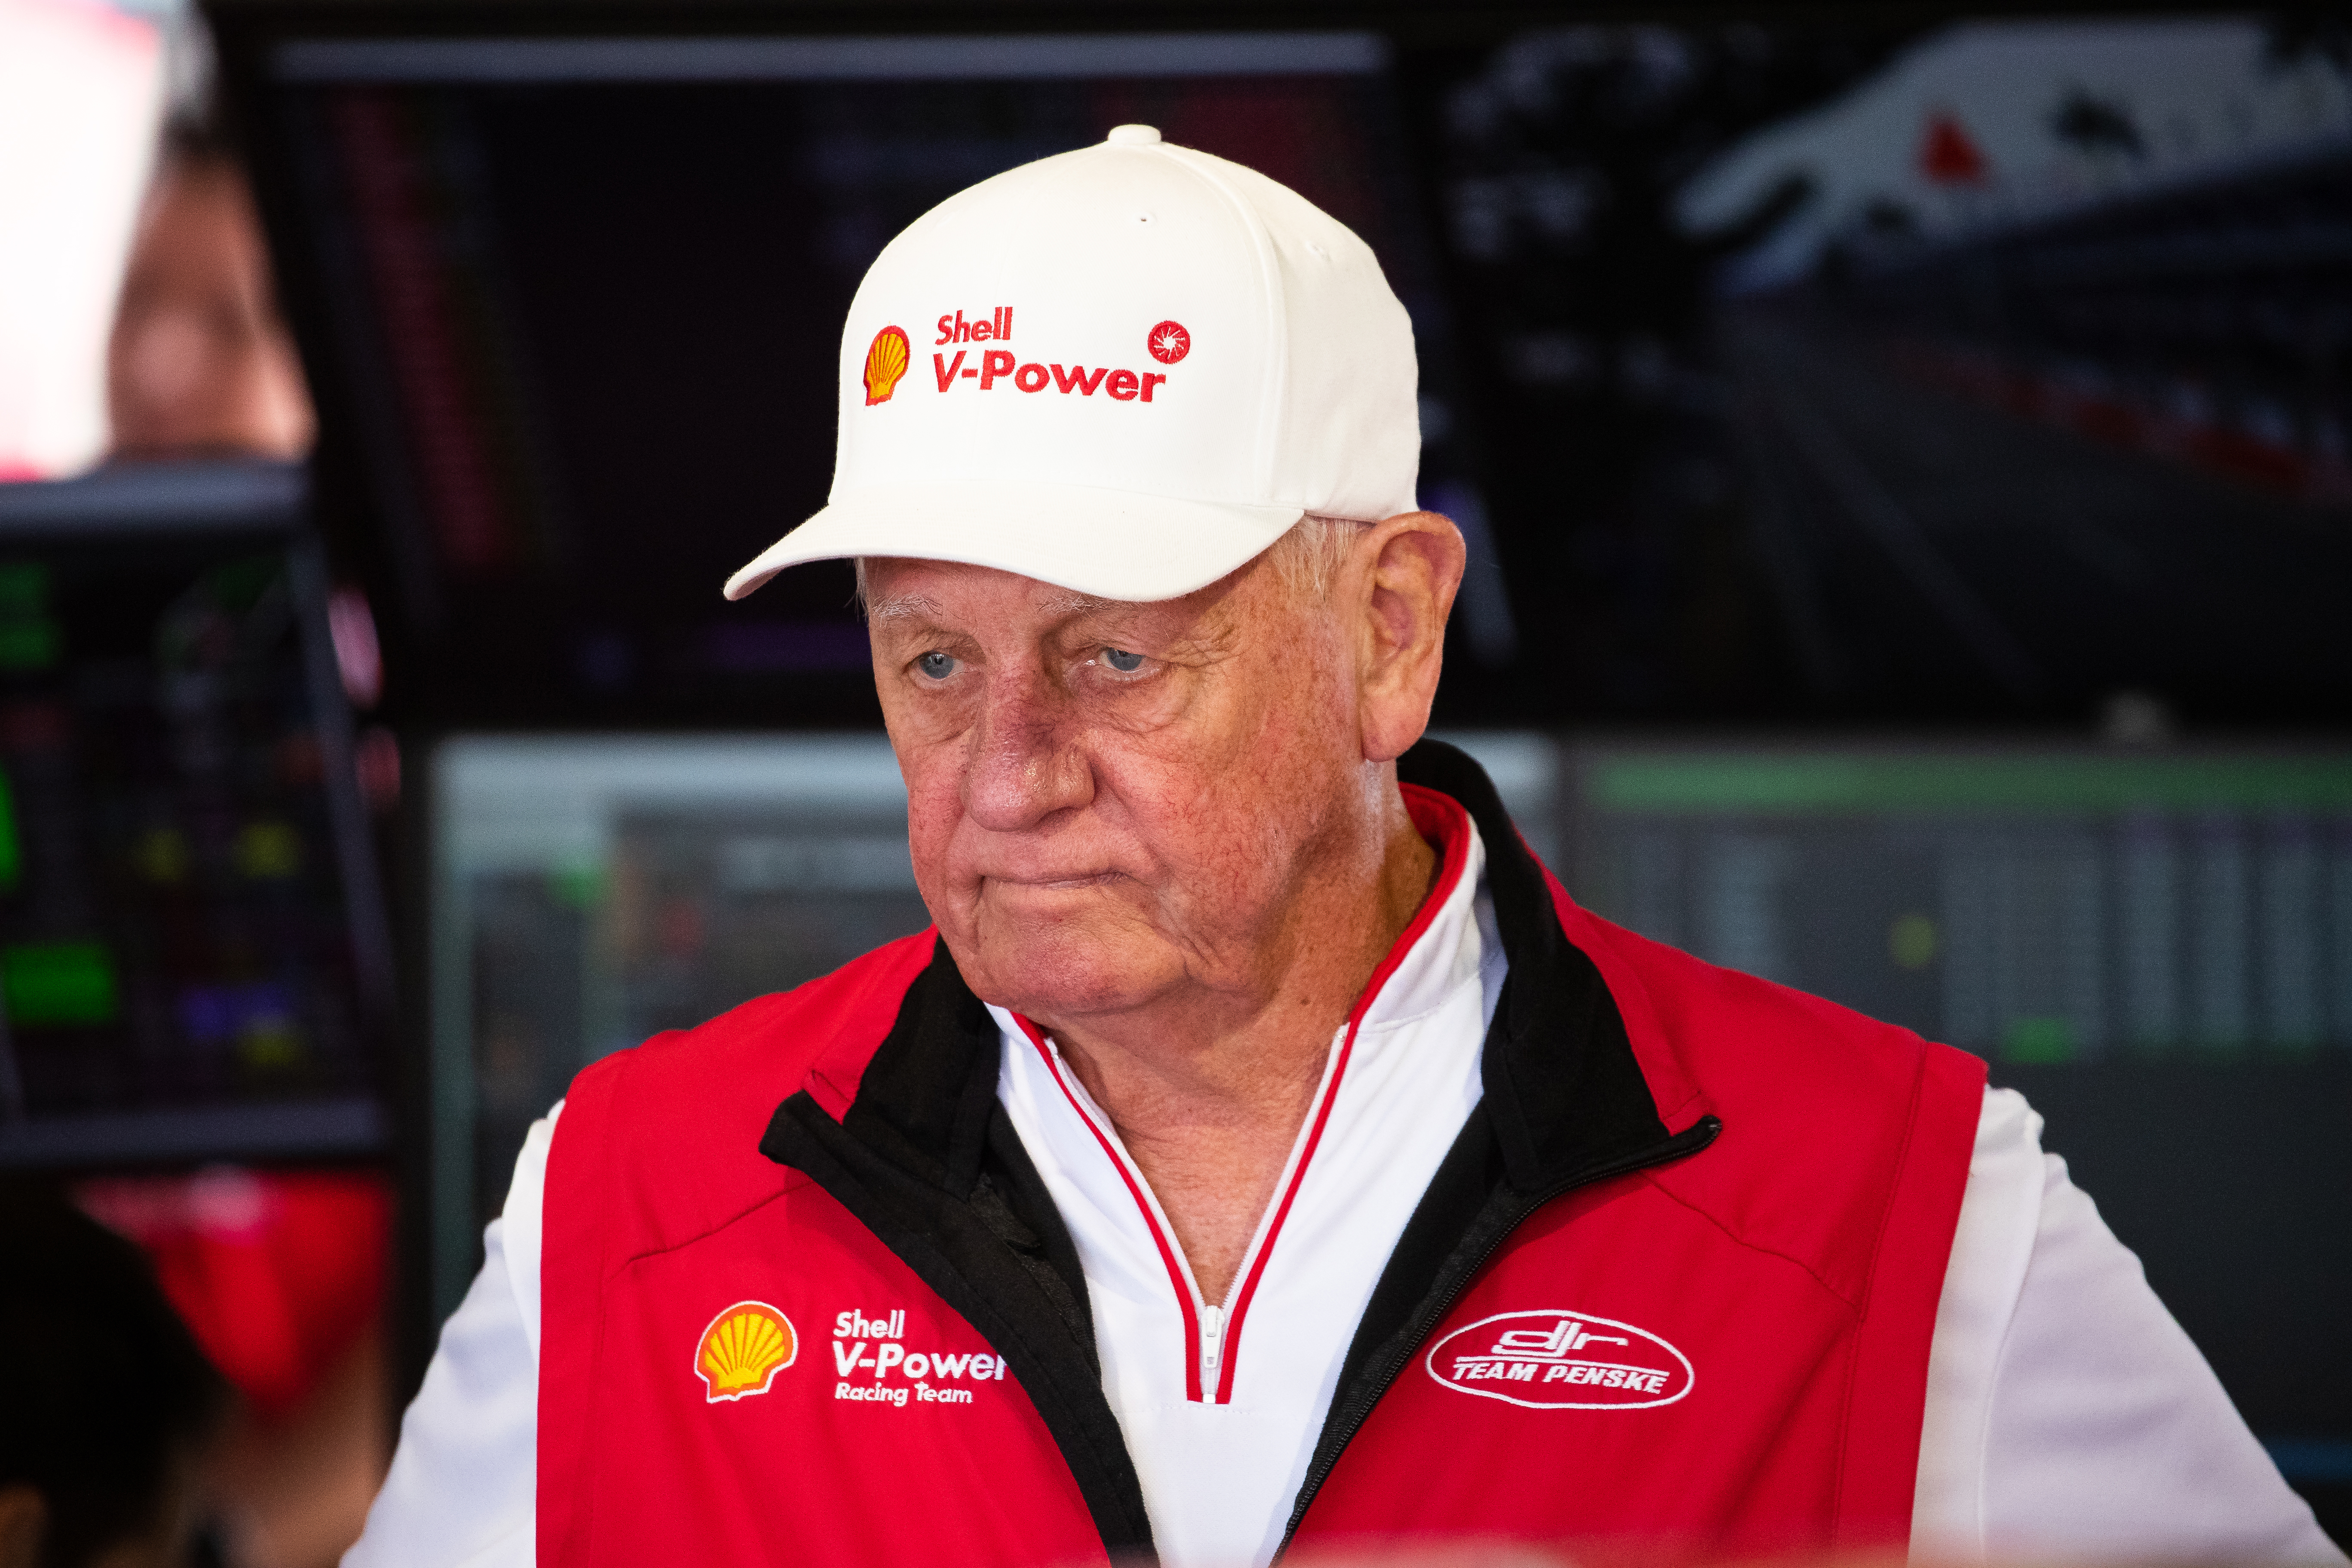 Dick Johnson at the 2019 Newcastle 500 Supercars event.